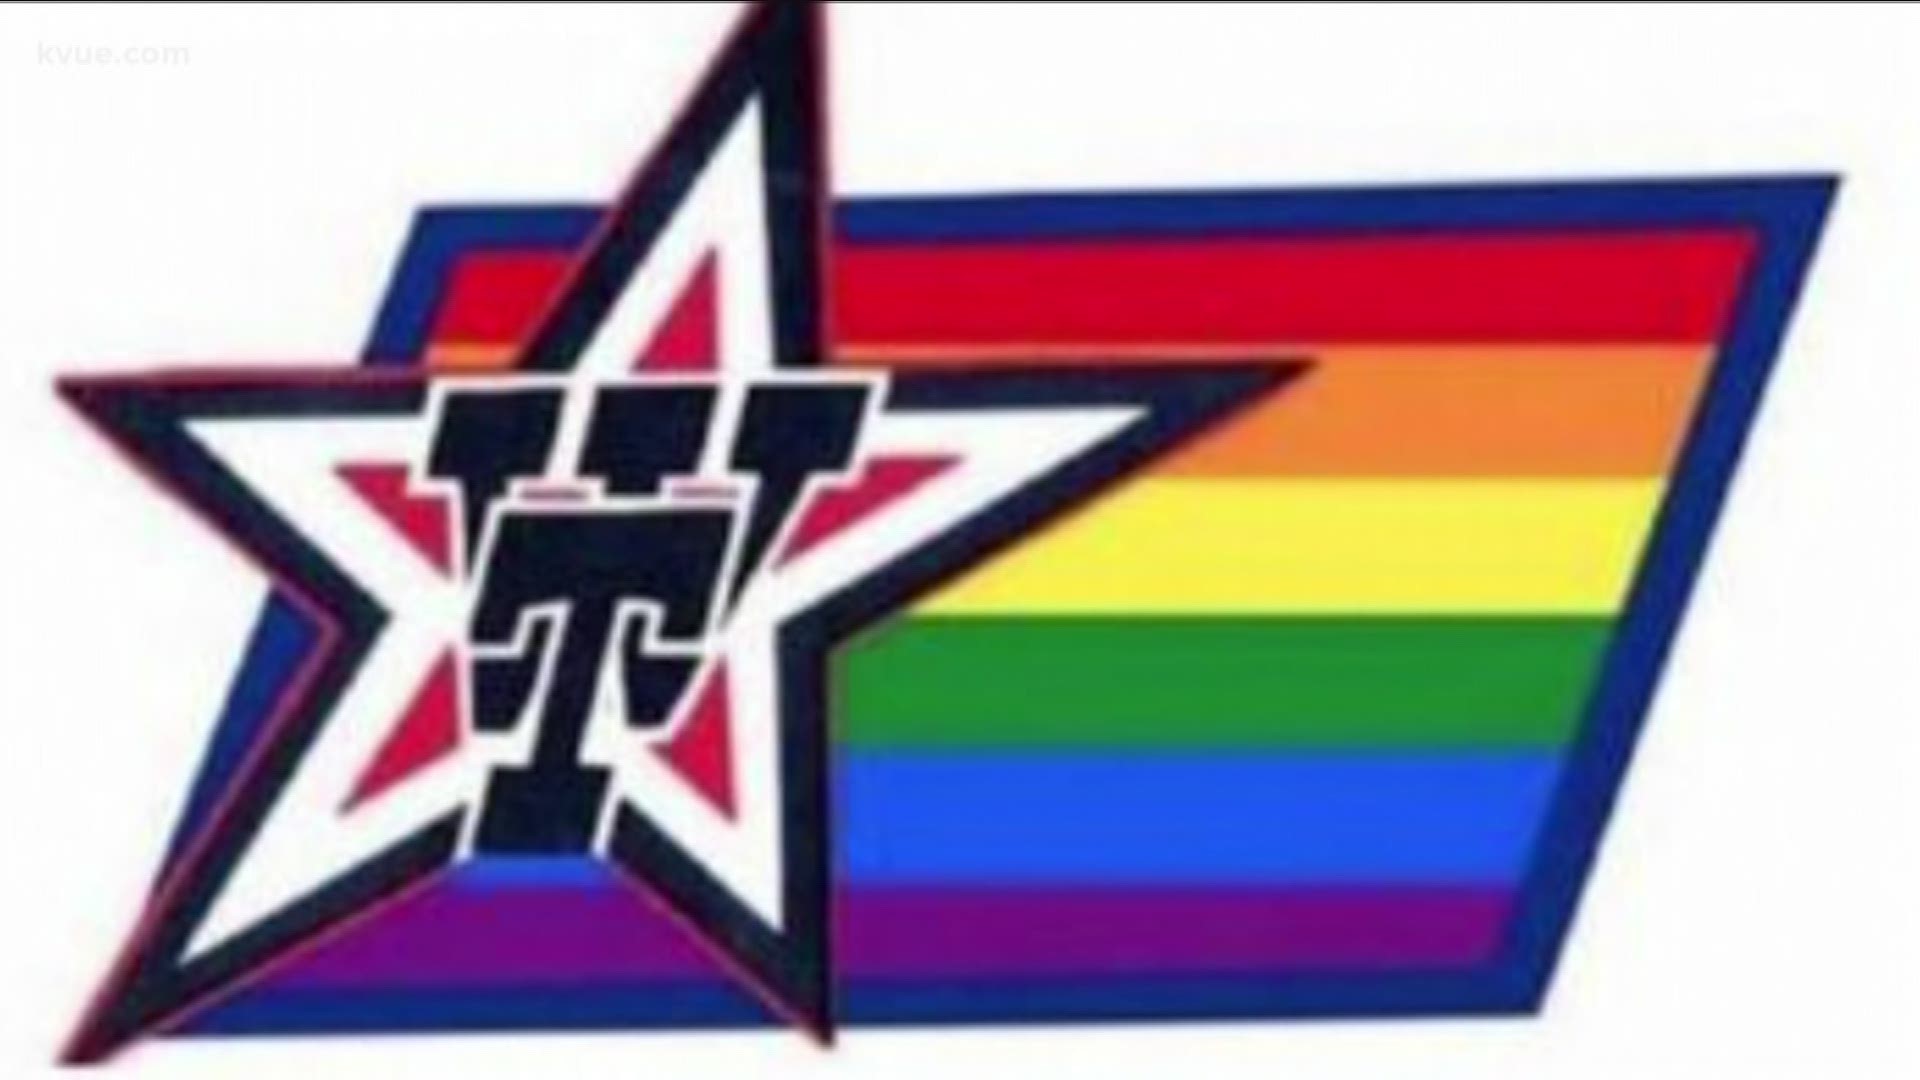 The school district is threatening to sue parents after they reportedly altered a school logo as part of a pride march.